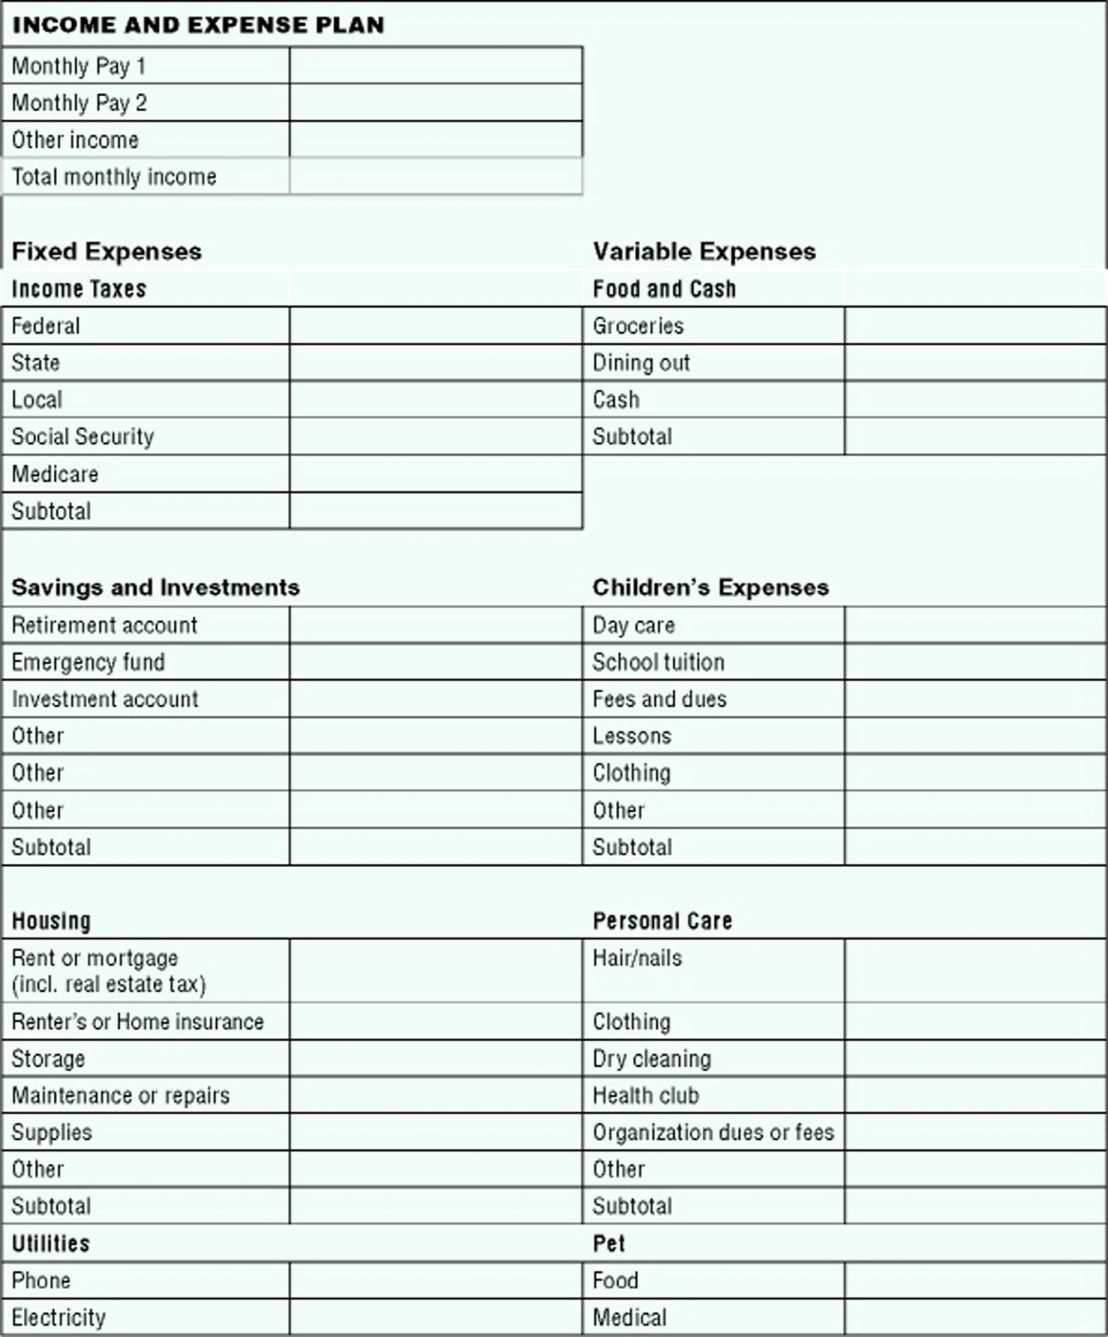 Property Investment Spreadsheet Uk With Rental Property Calculator Spreadsheet Tax Uk Free Sample Worksheets